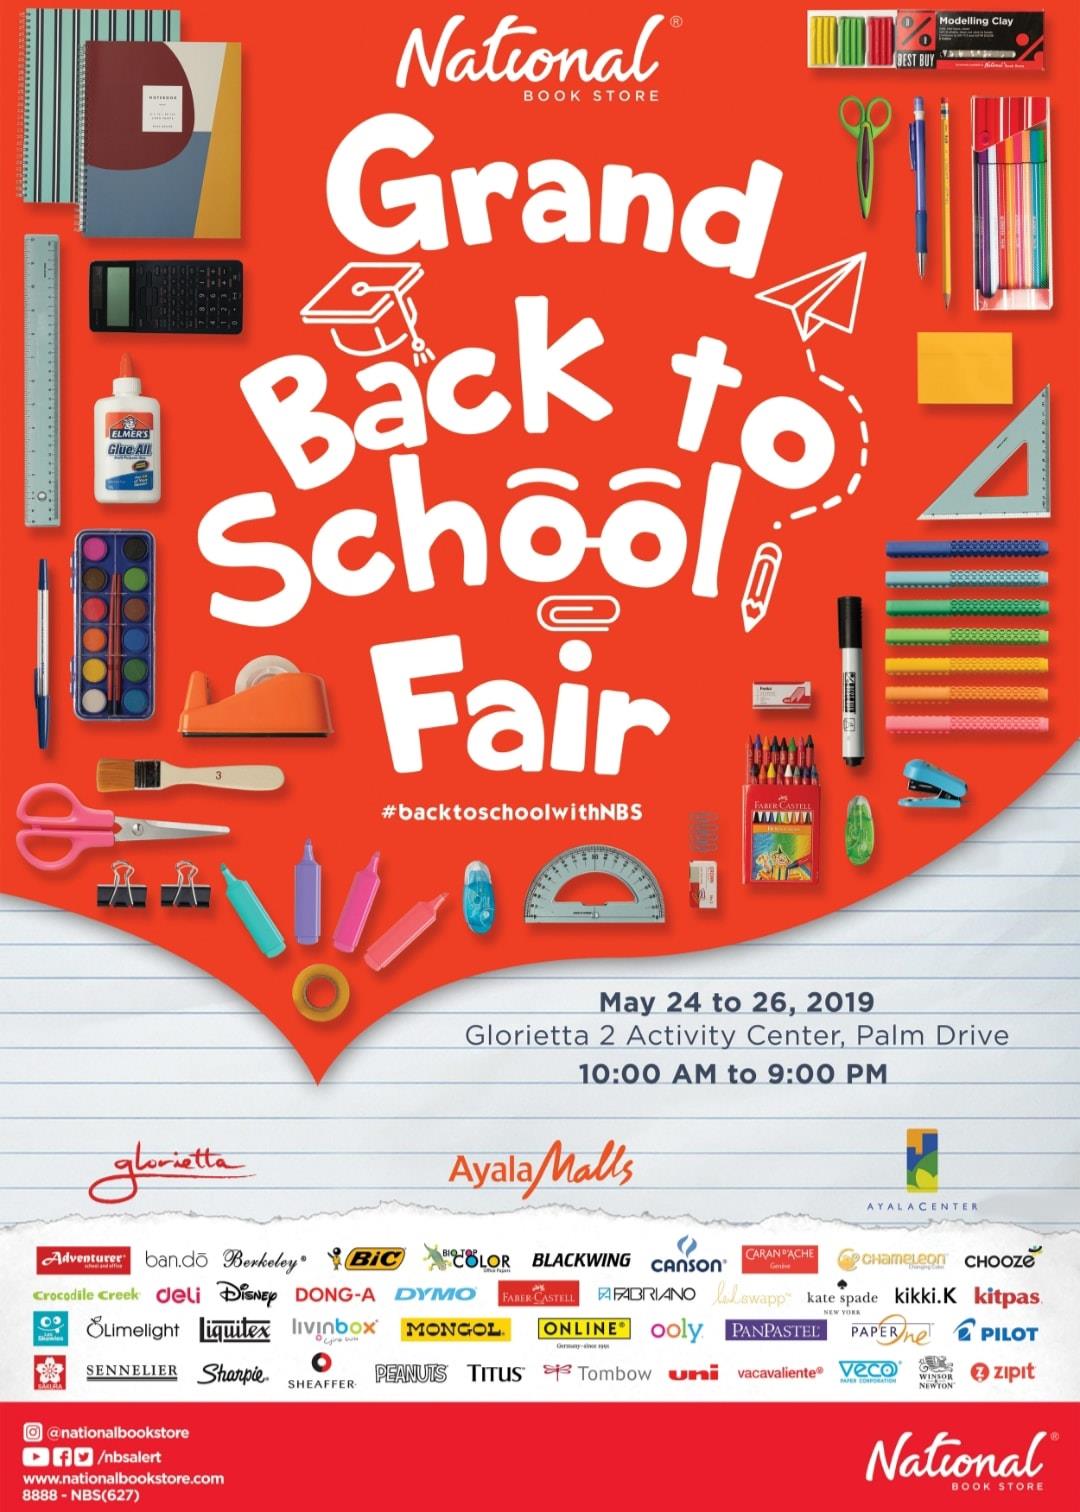 National Book Store's Grand Back to School Fair